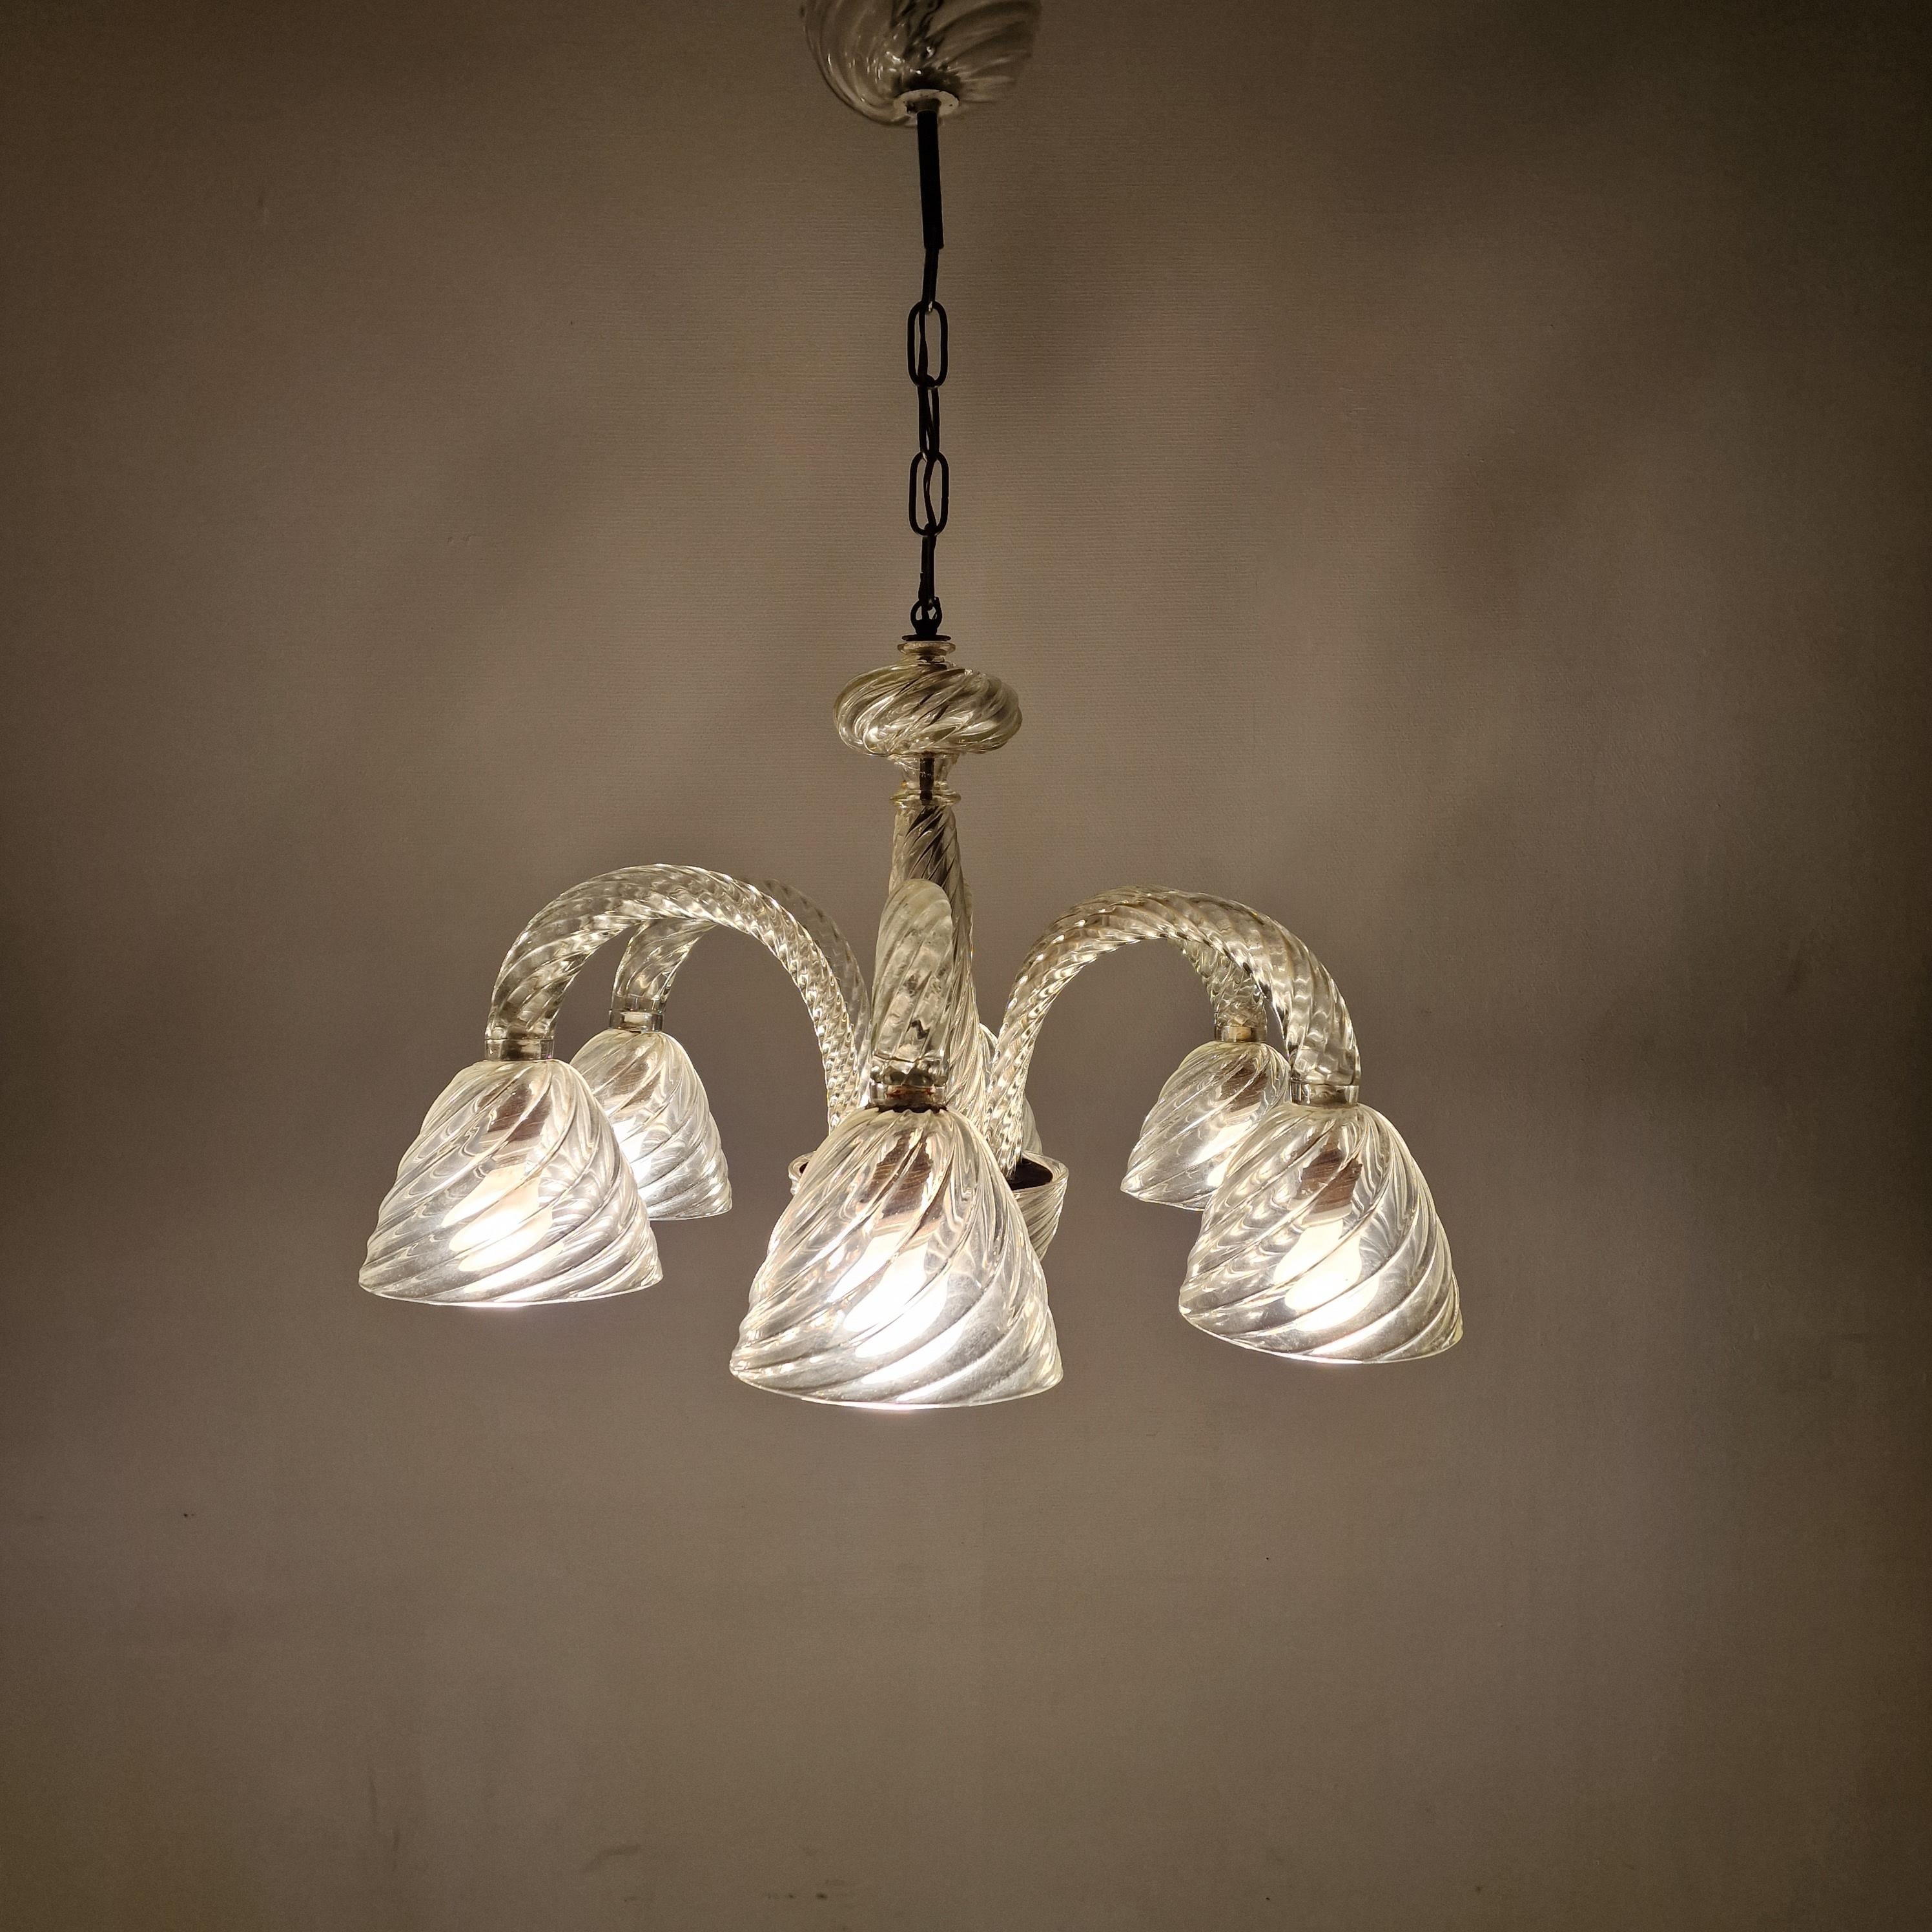 Italian Barovier & Toso Murano Glass Chandelier, Italy 1950's For Sale